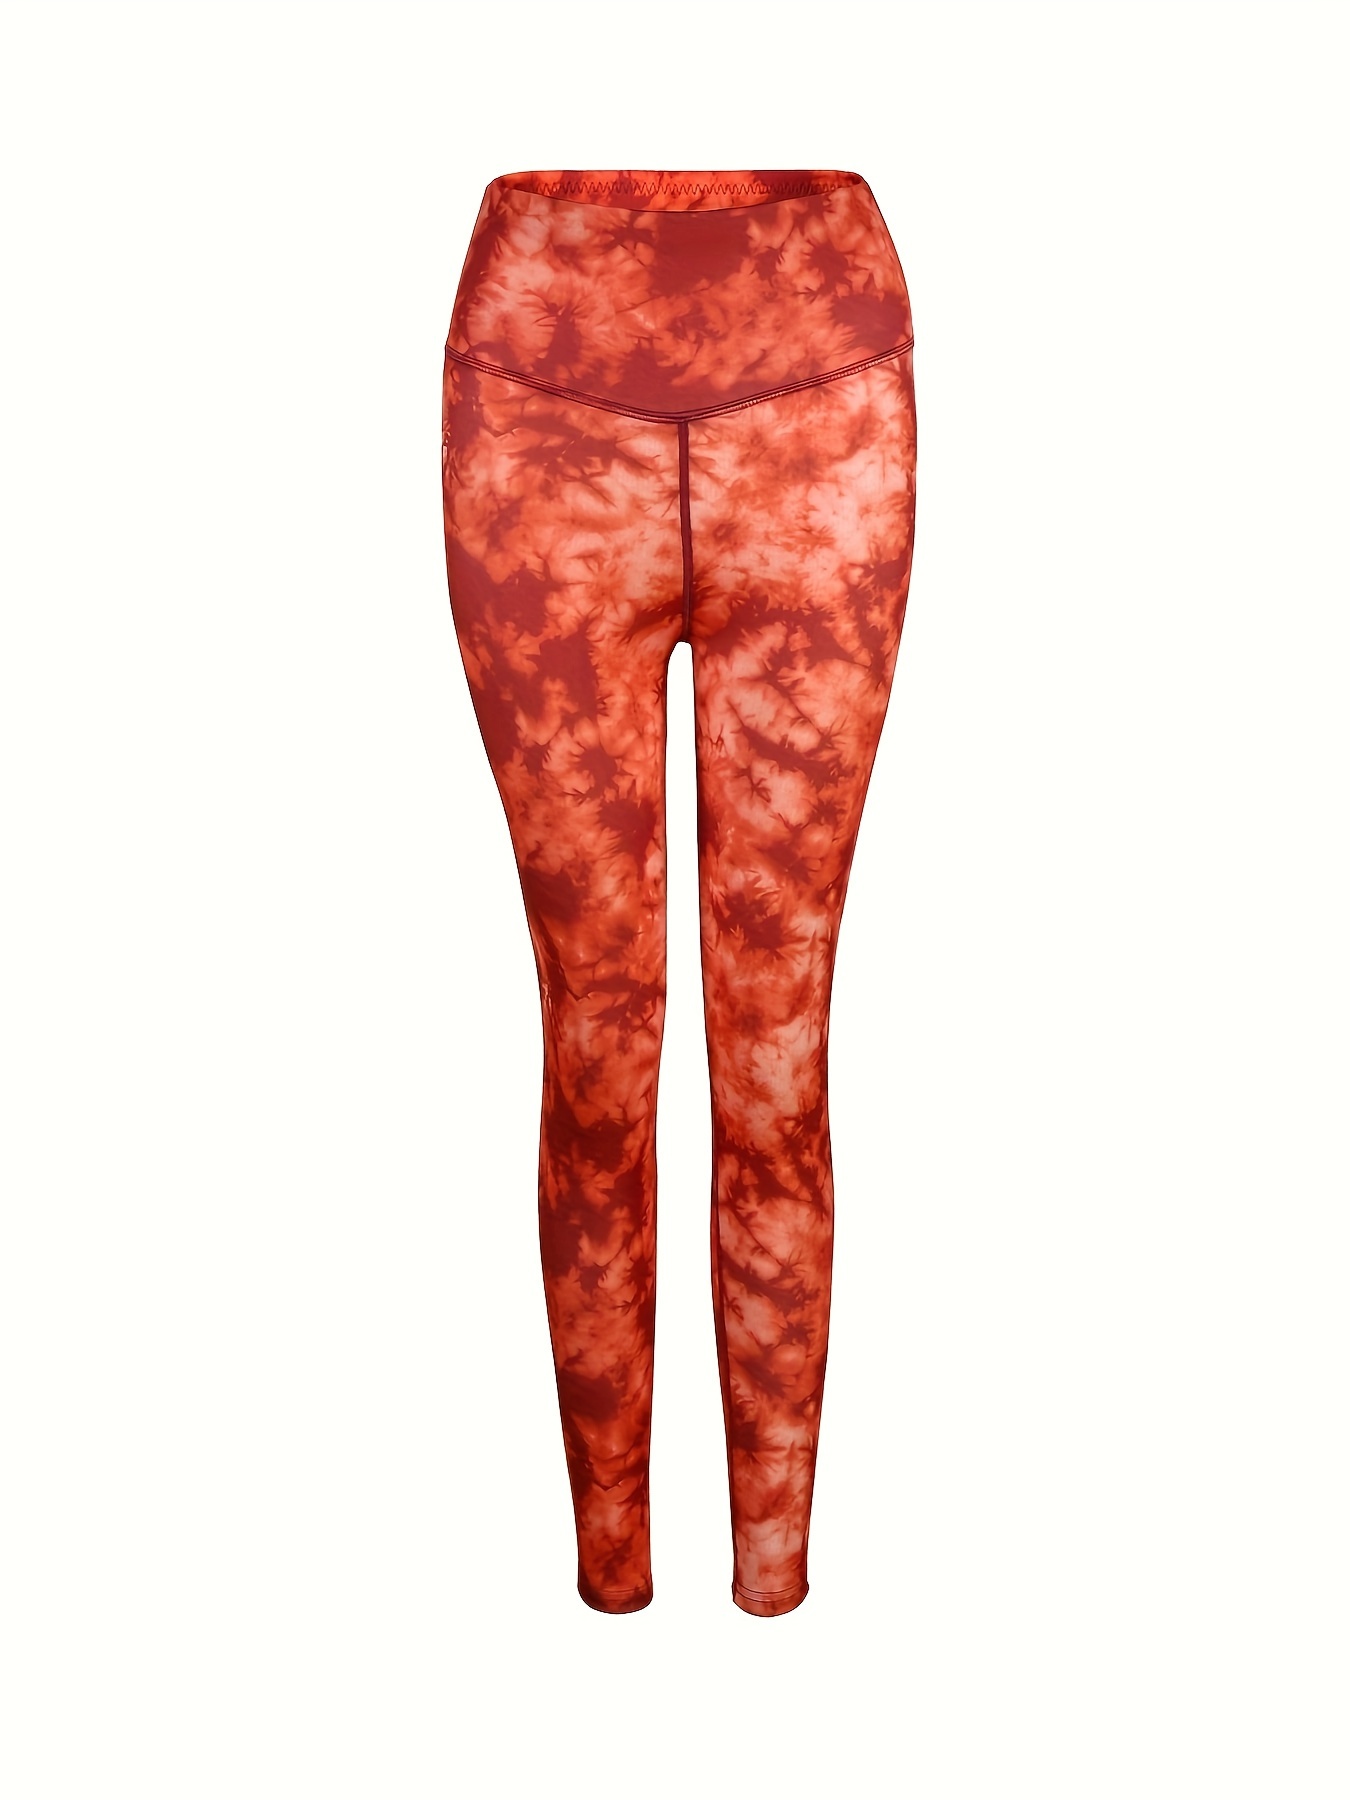 Burnt Orange Yoga Leggings Women, Ombre Tie Dye Fall Autumn High Waisted  Pants Cute Printed Workout Gym Designer Tights -  Canada